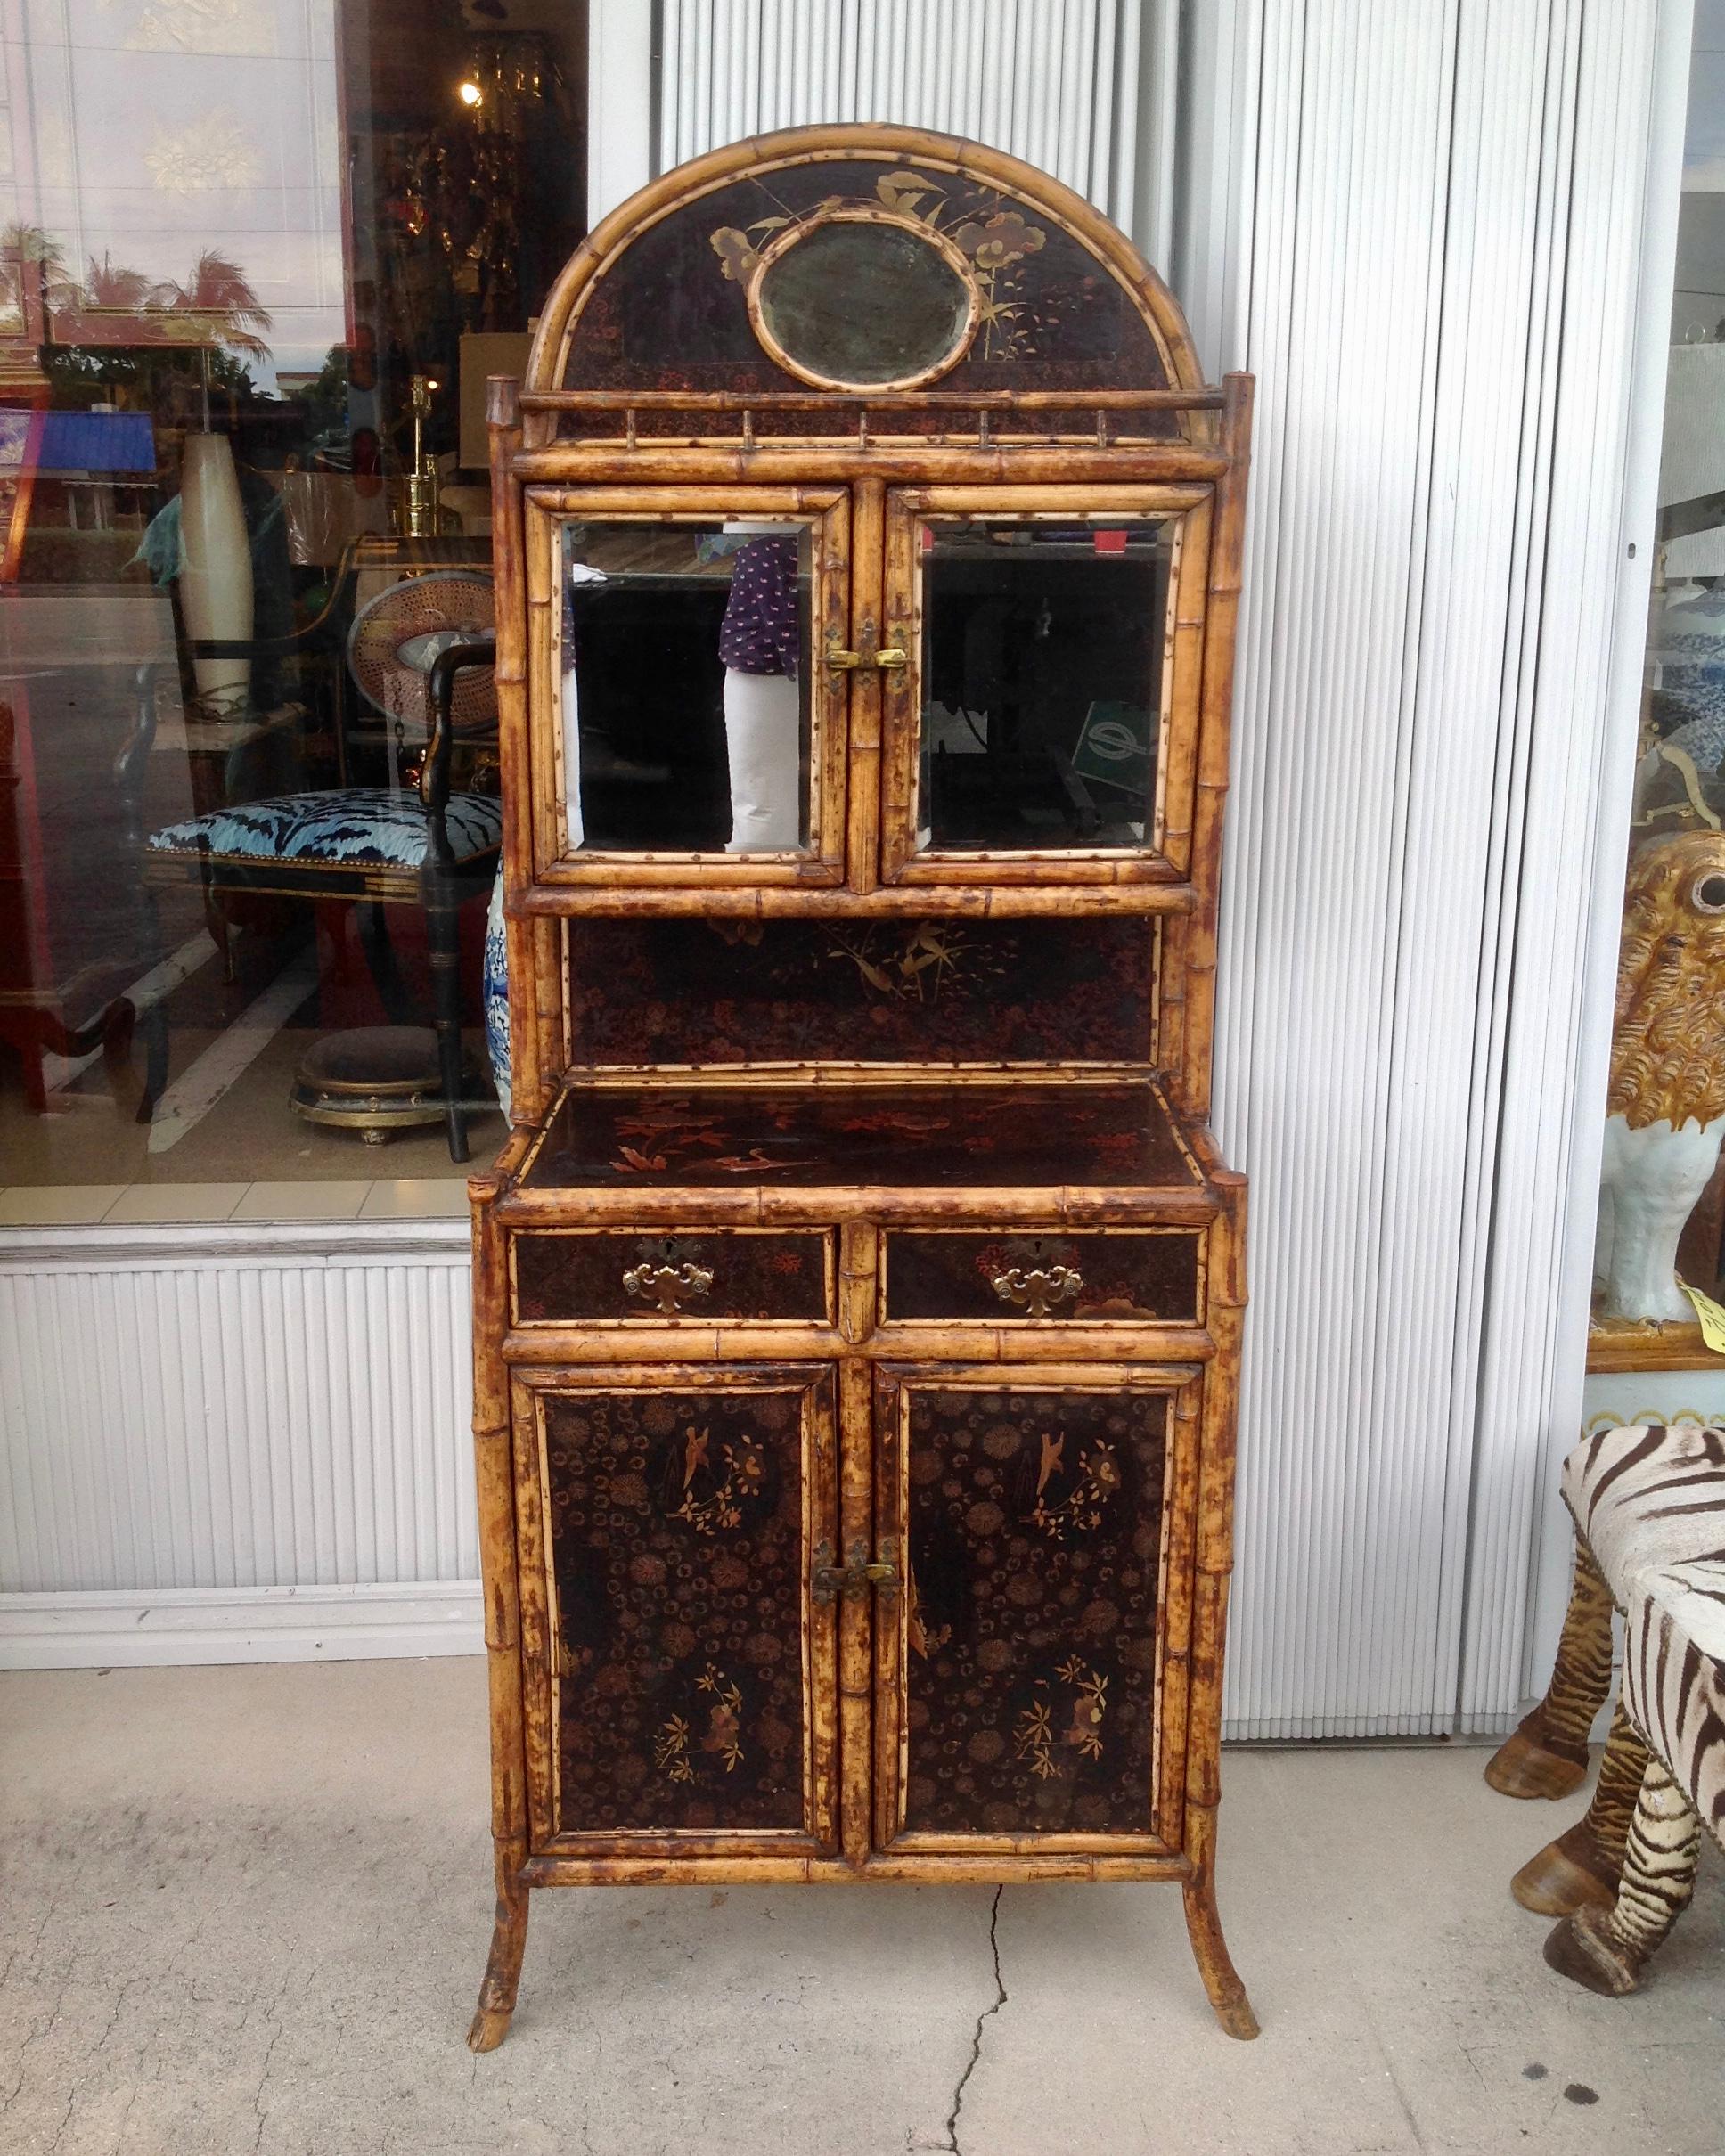 Elegant design fashioned with mirrored doors and accented with a central
mirrored medallion. The cabinet is accented with chinoiserie lacquered panels.
Unusual form and design from Edwardian era.